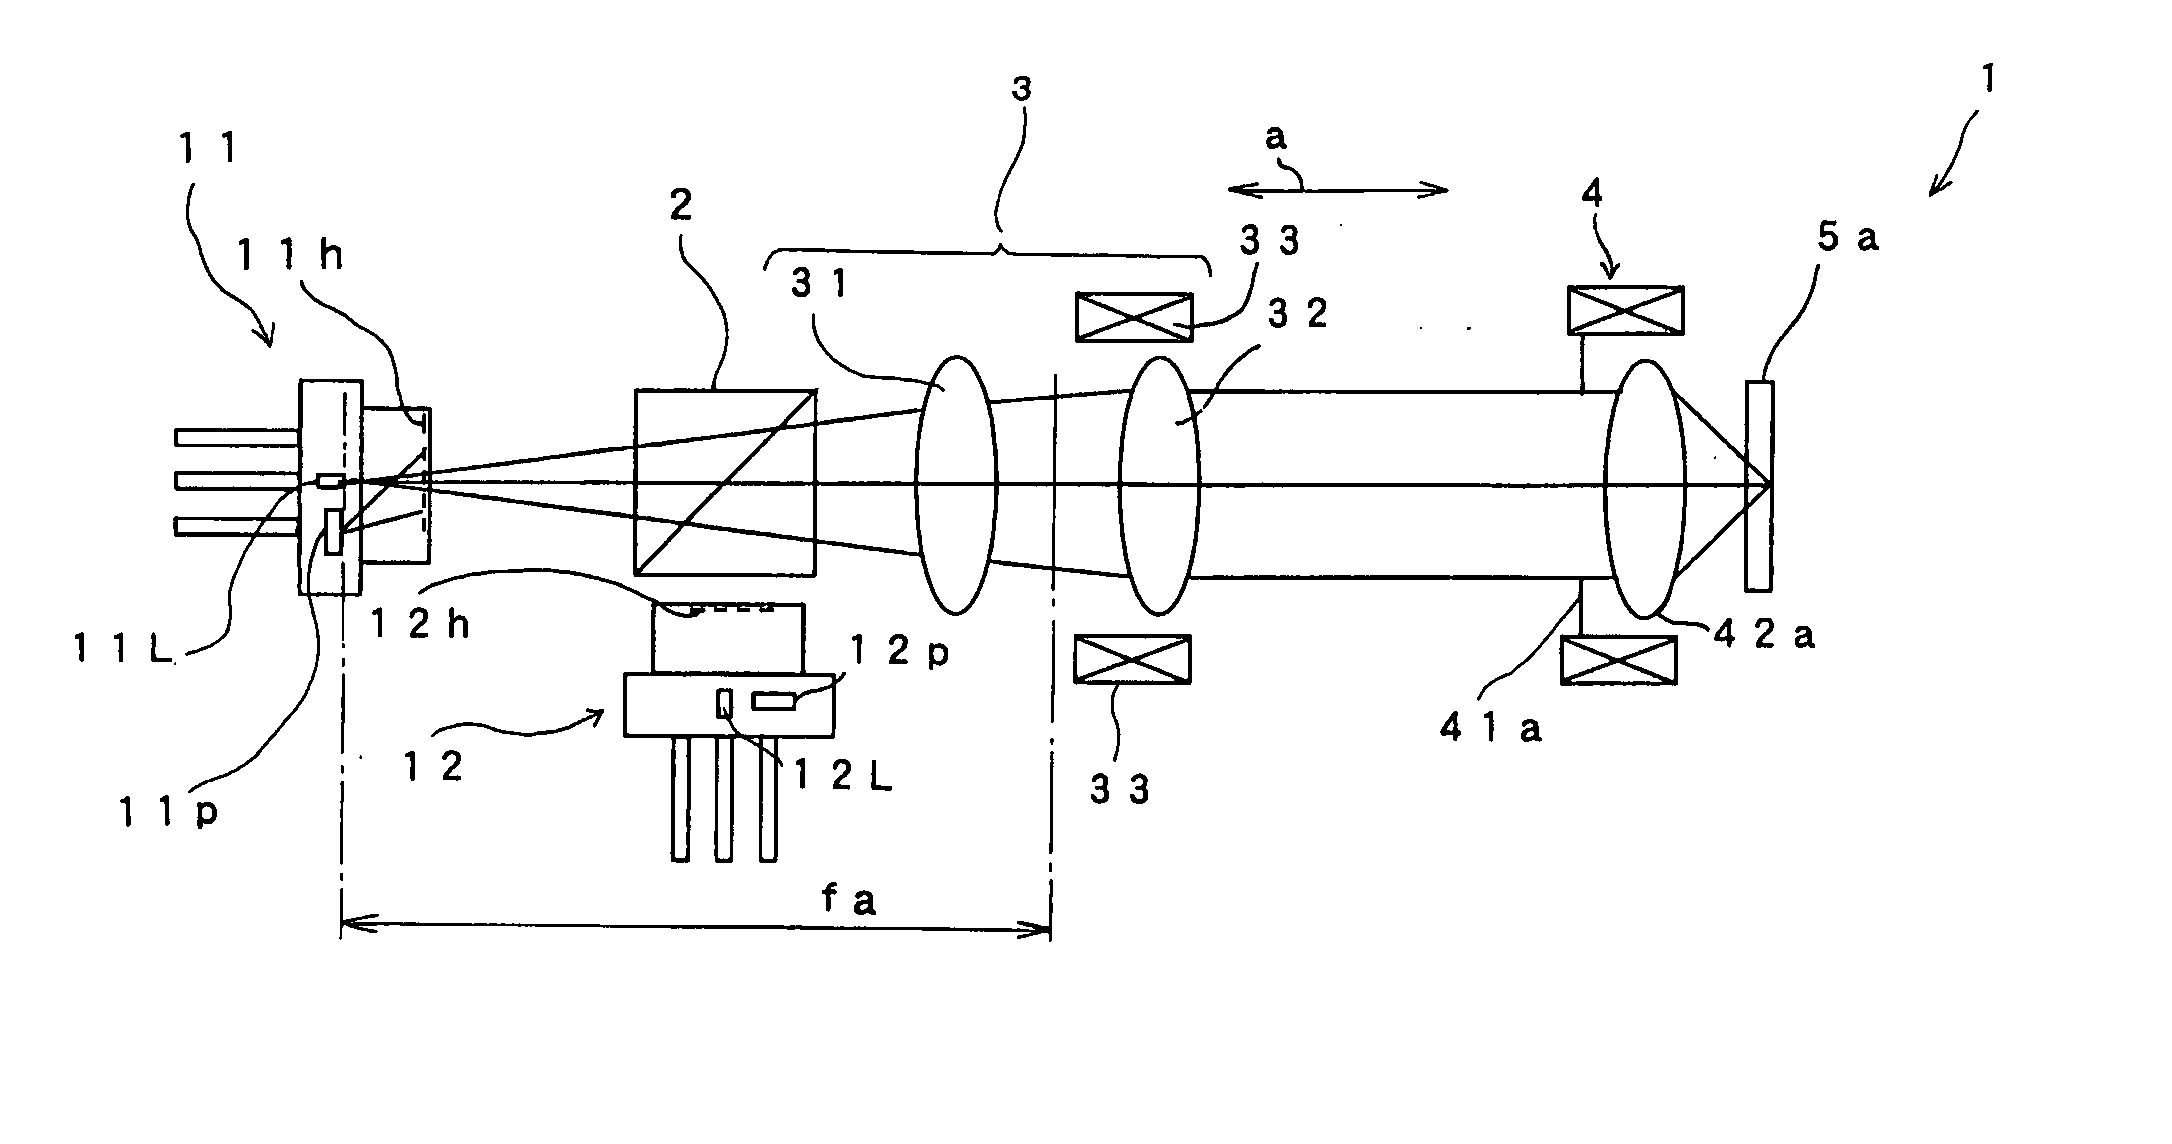 Optical pickup apparatus and an optical disc drive apparatus equipped with such an optical pickup